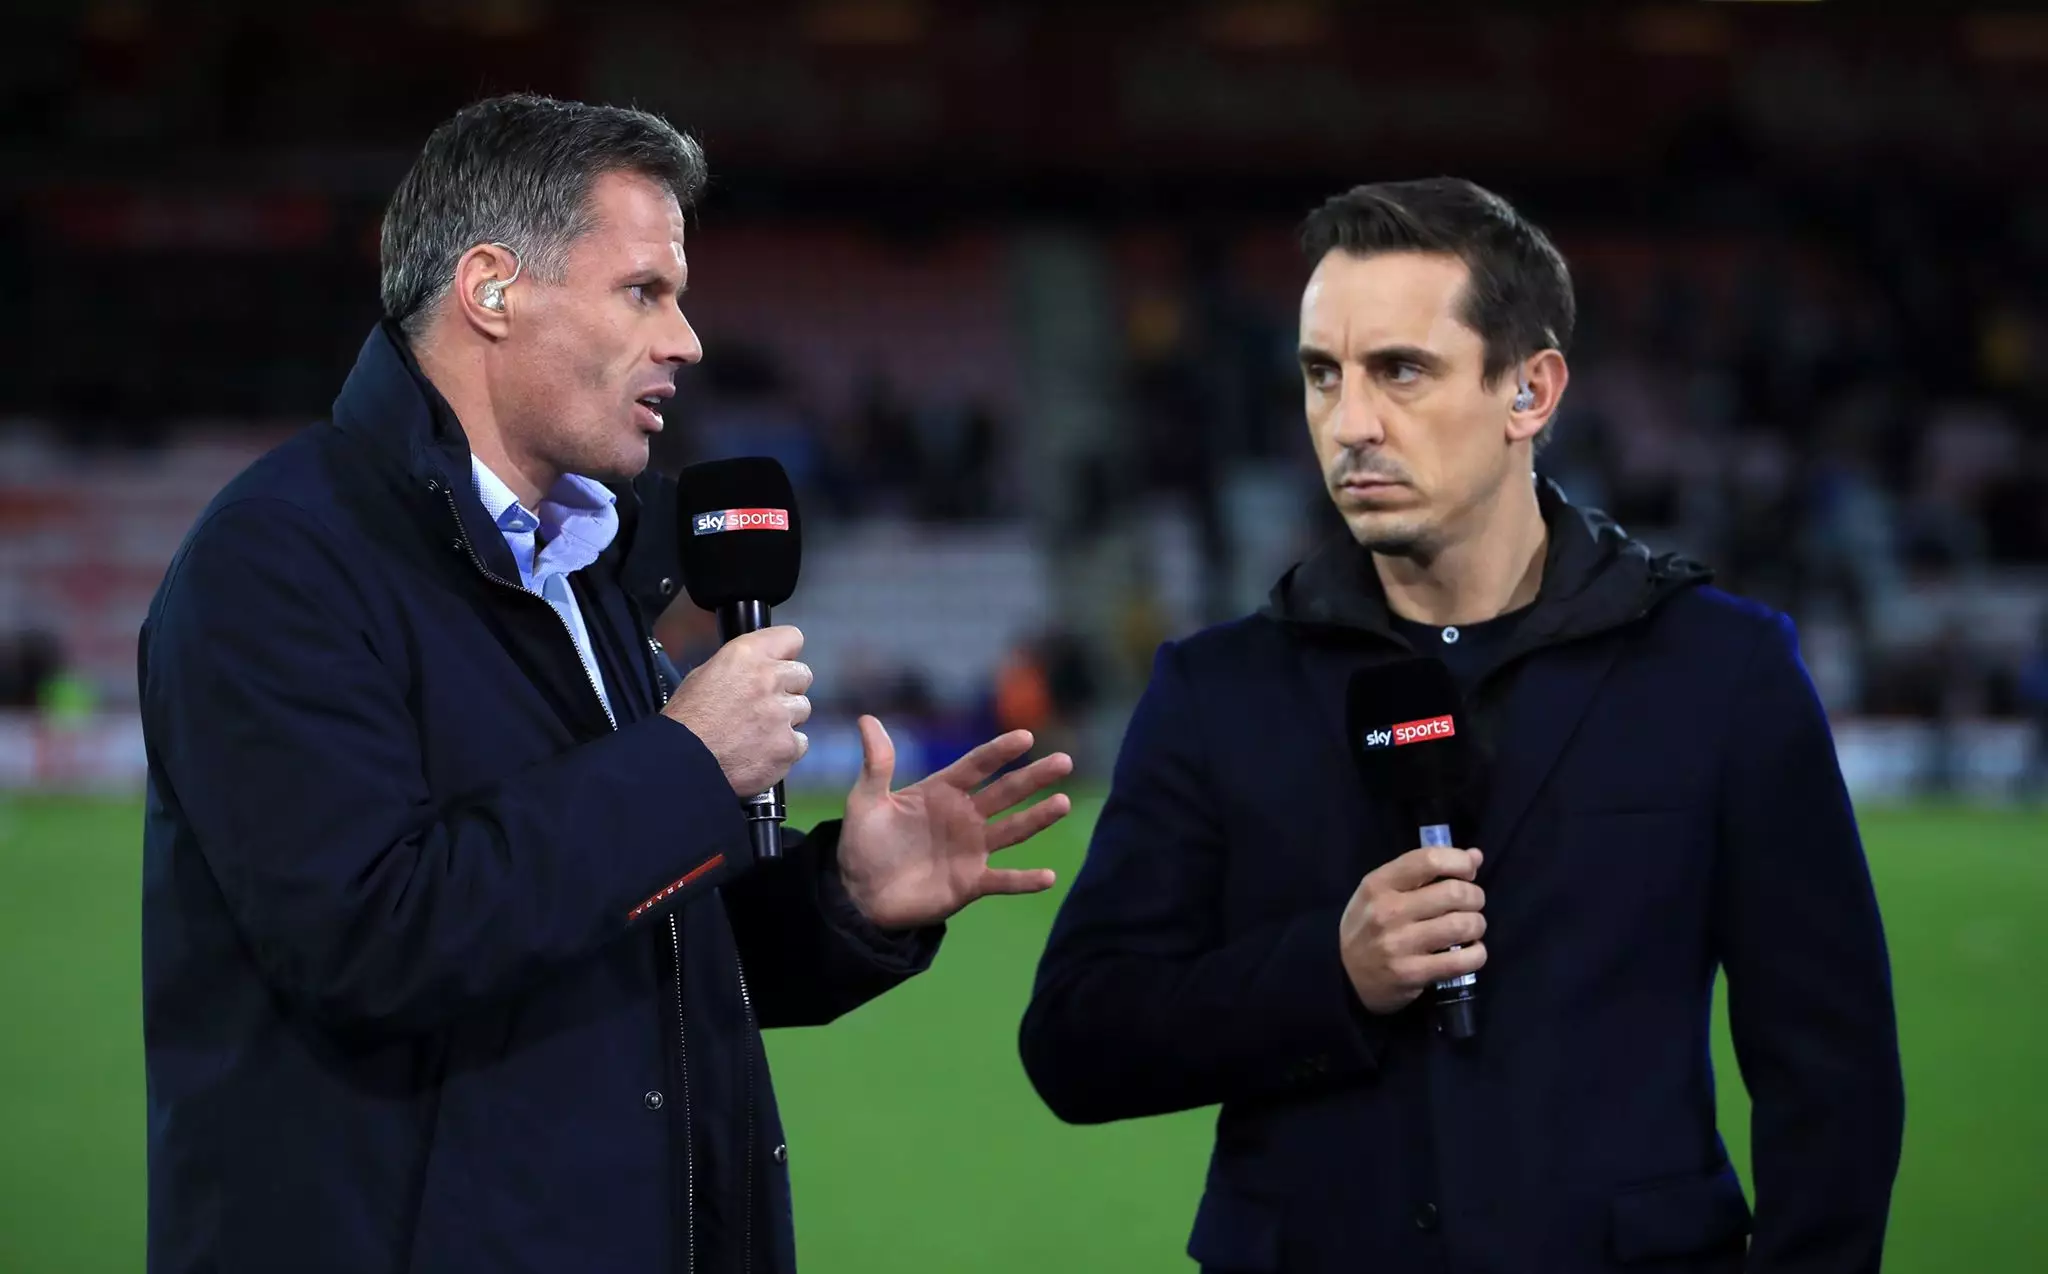 Carrager and Neville working for Sky. Image: PA